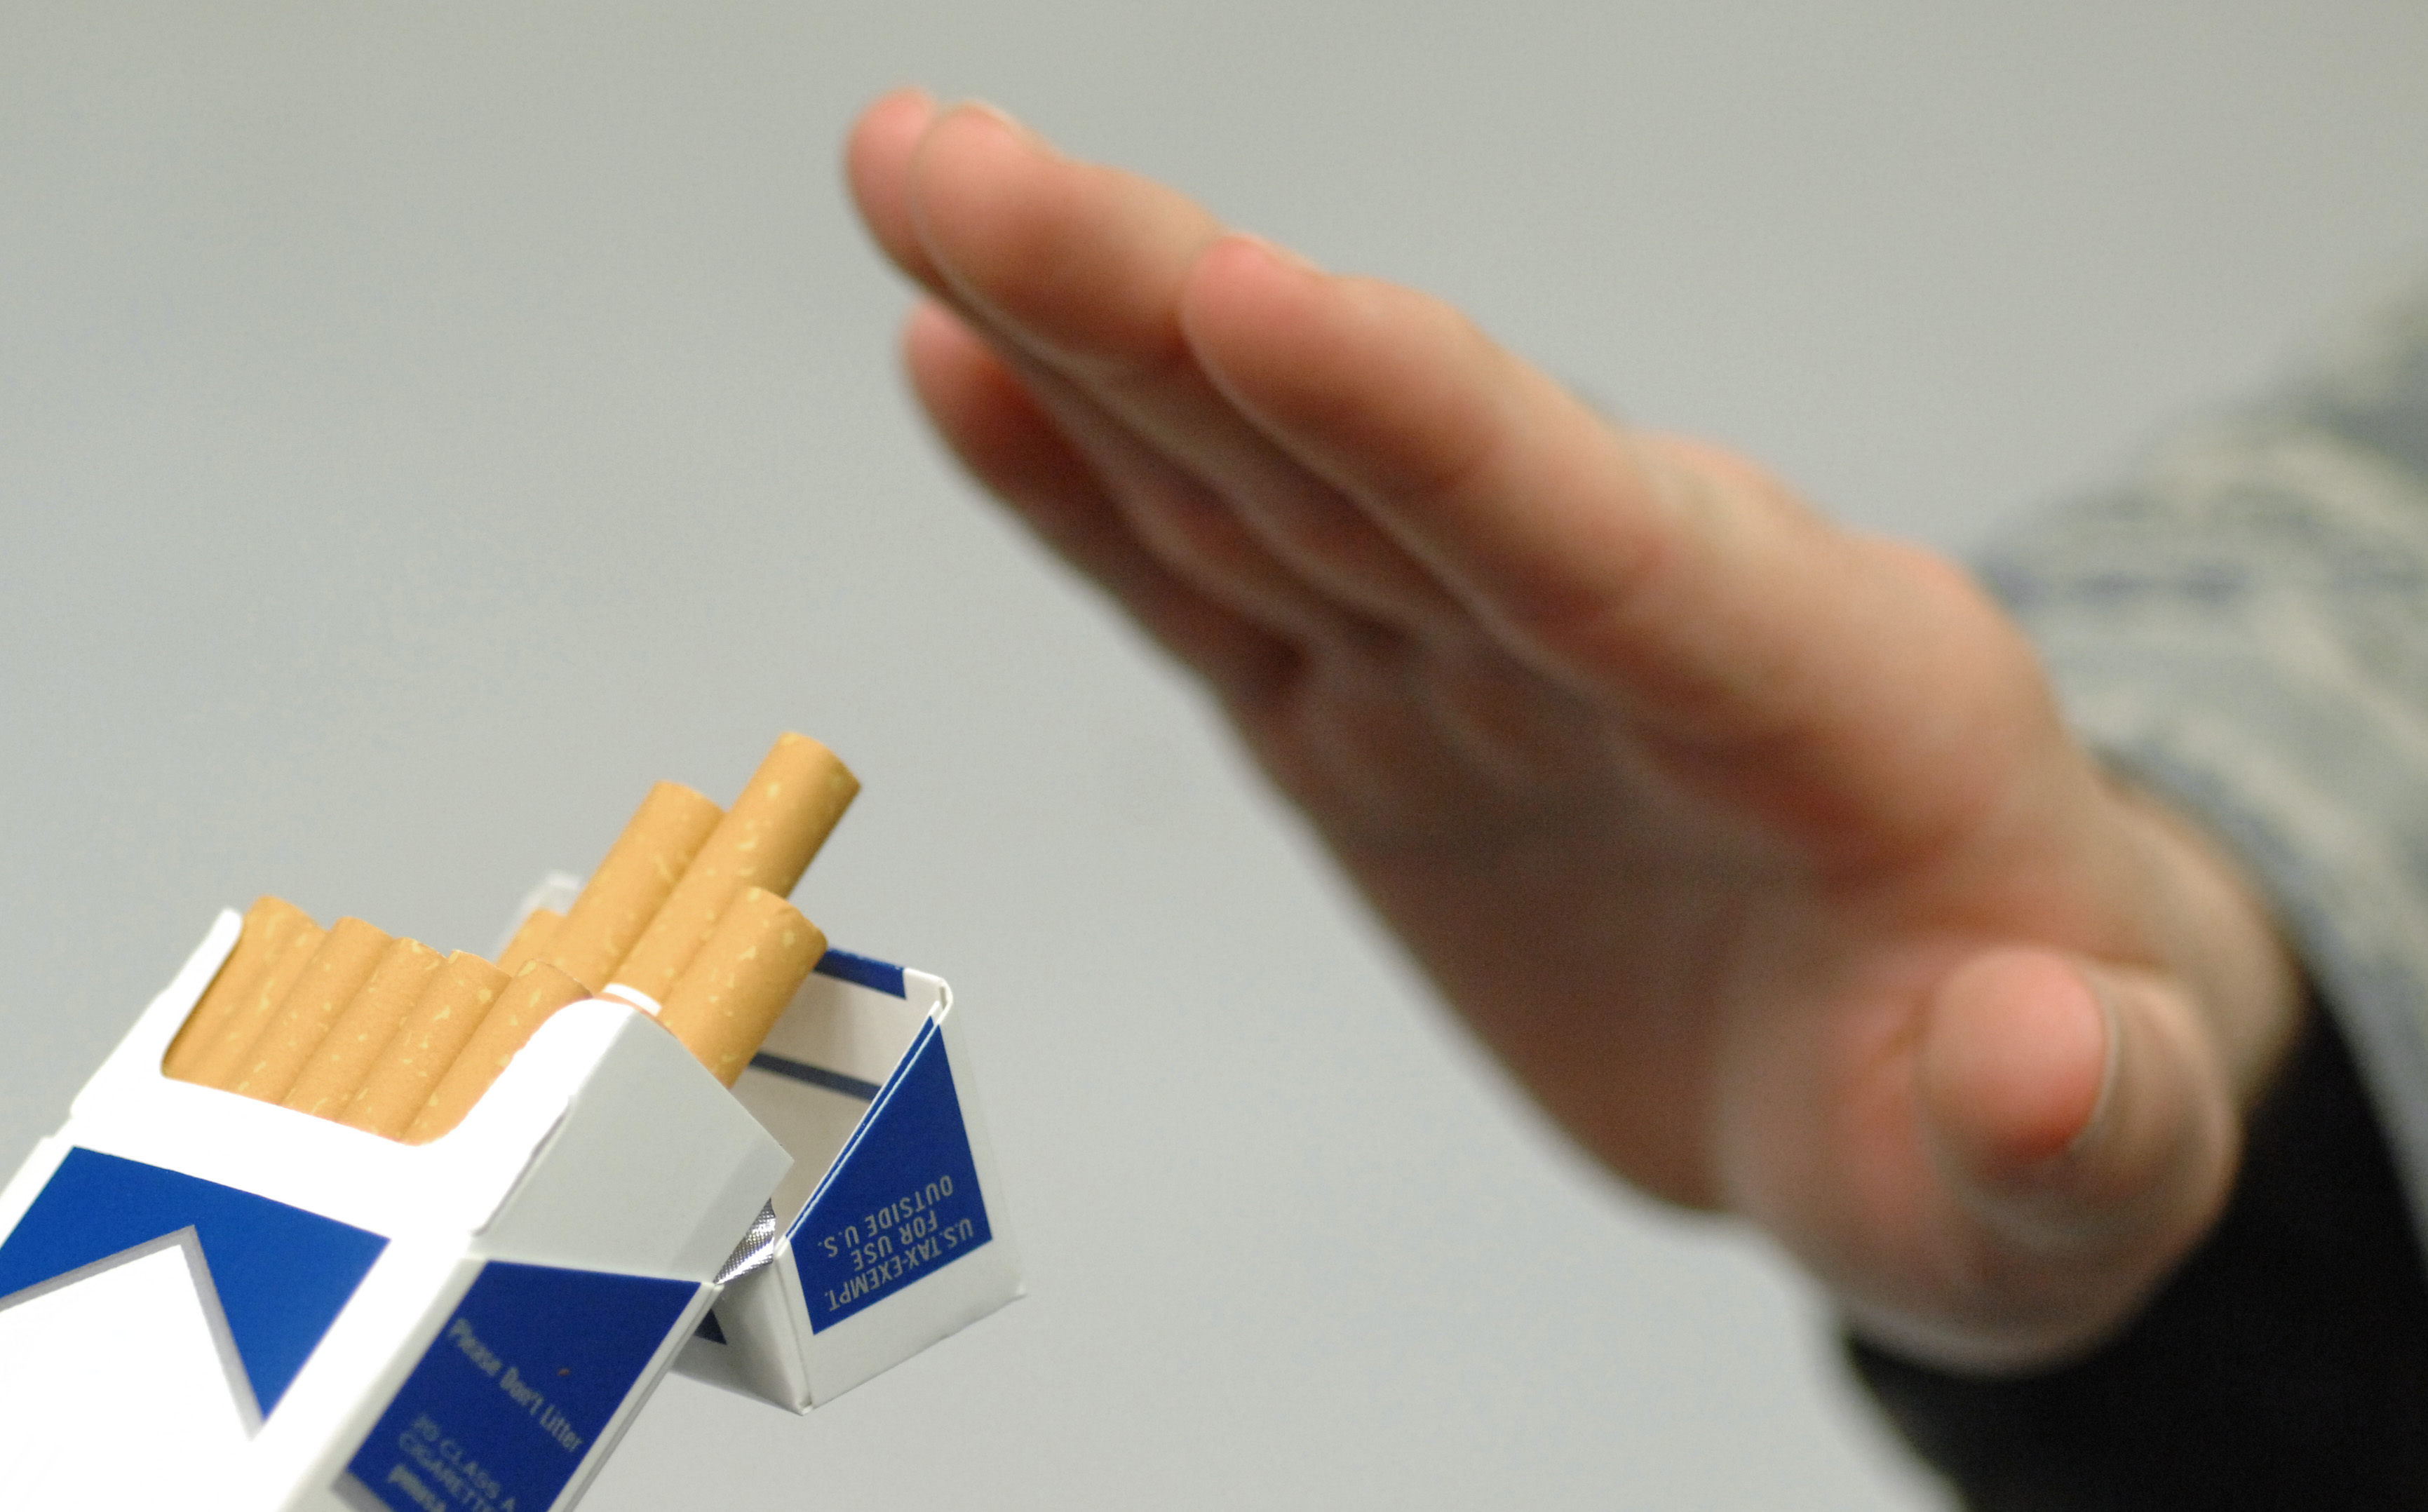 New York State's Smoking Rate Hits Record Low | WFUV